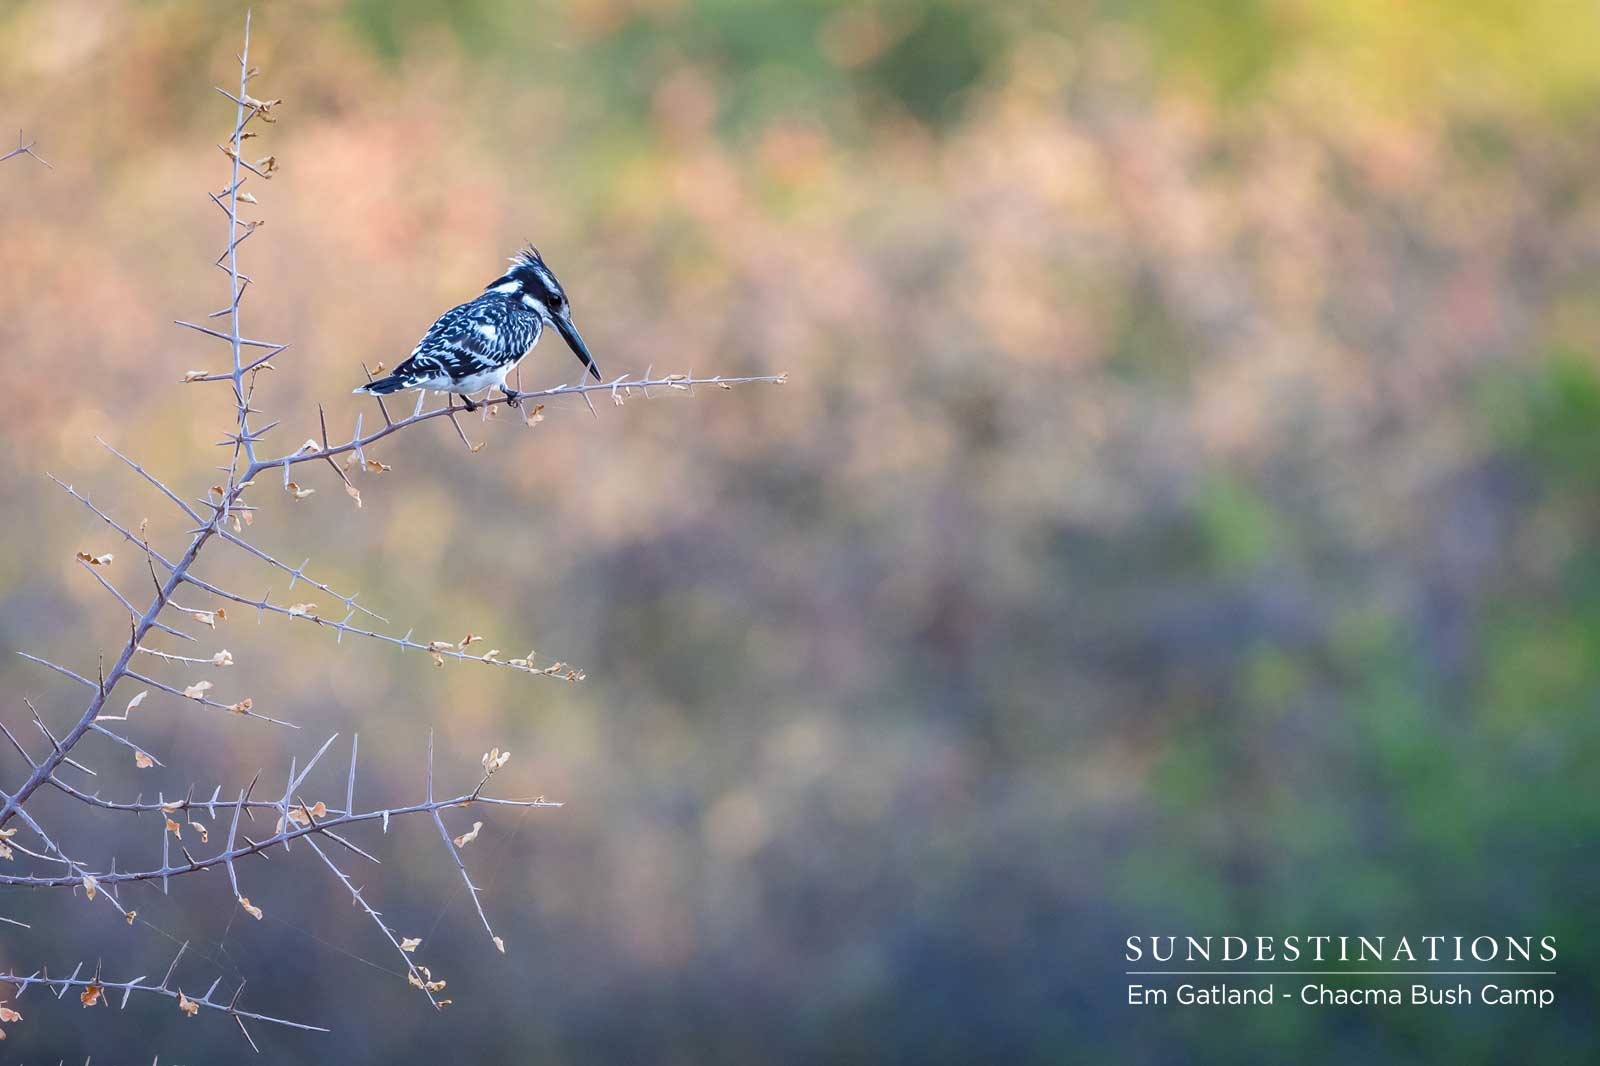 Pied Kingfisher at Chacma